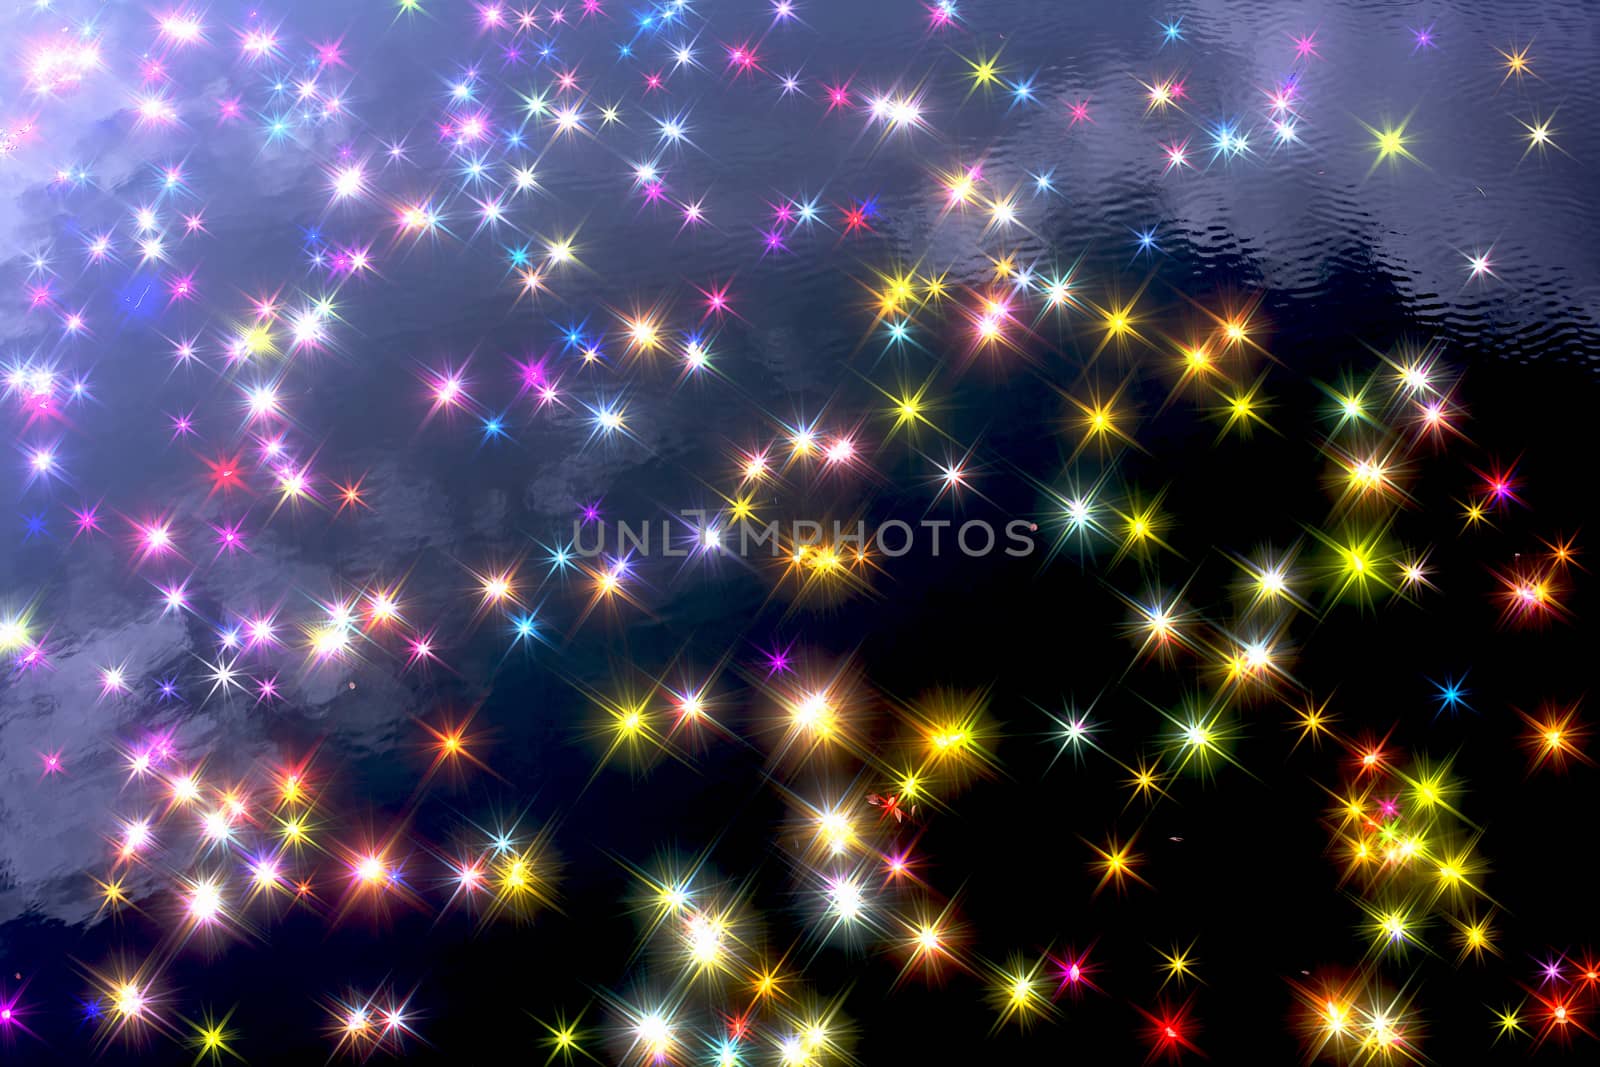 
Abstract colorful background as a reflection of multicolored stars in the water